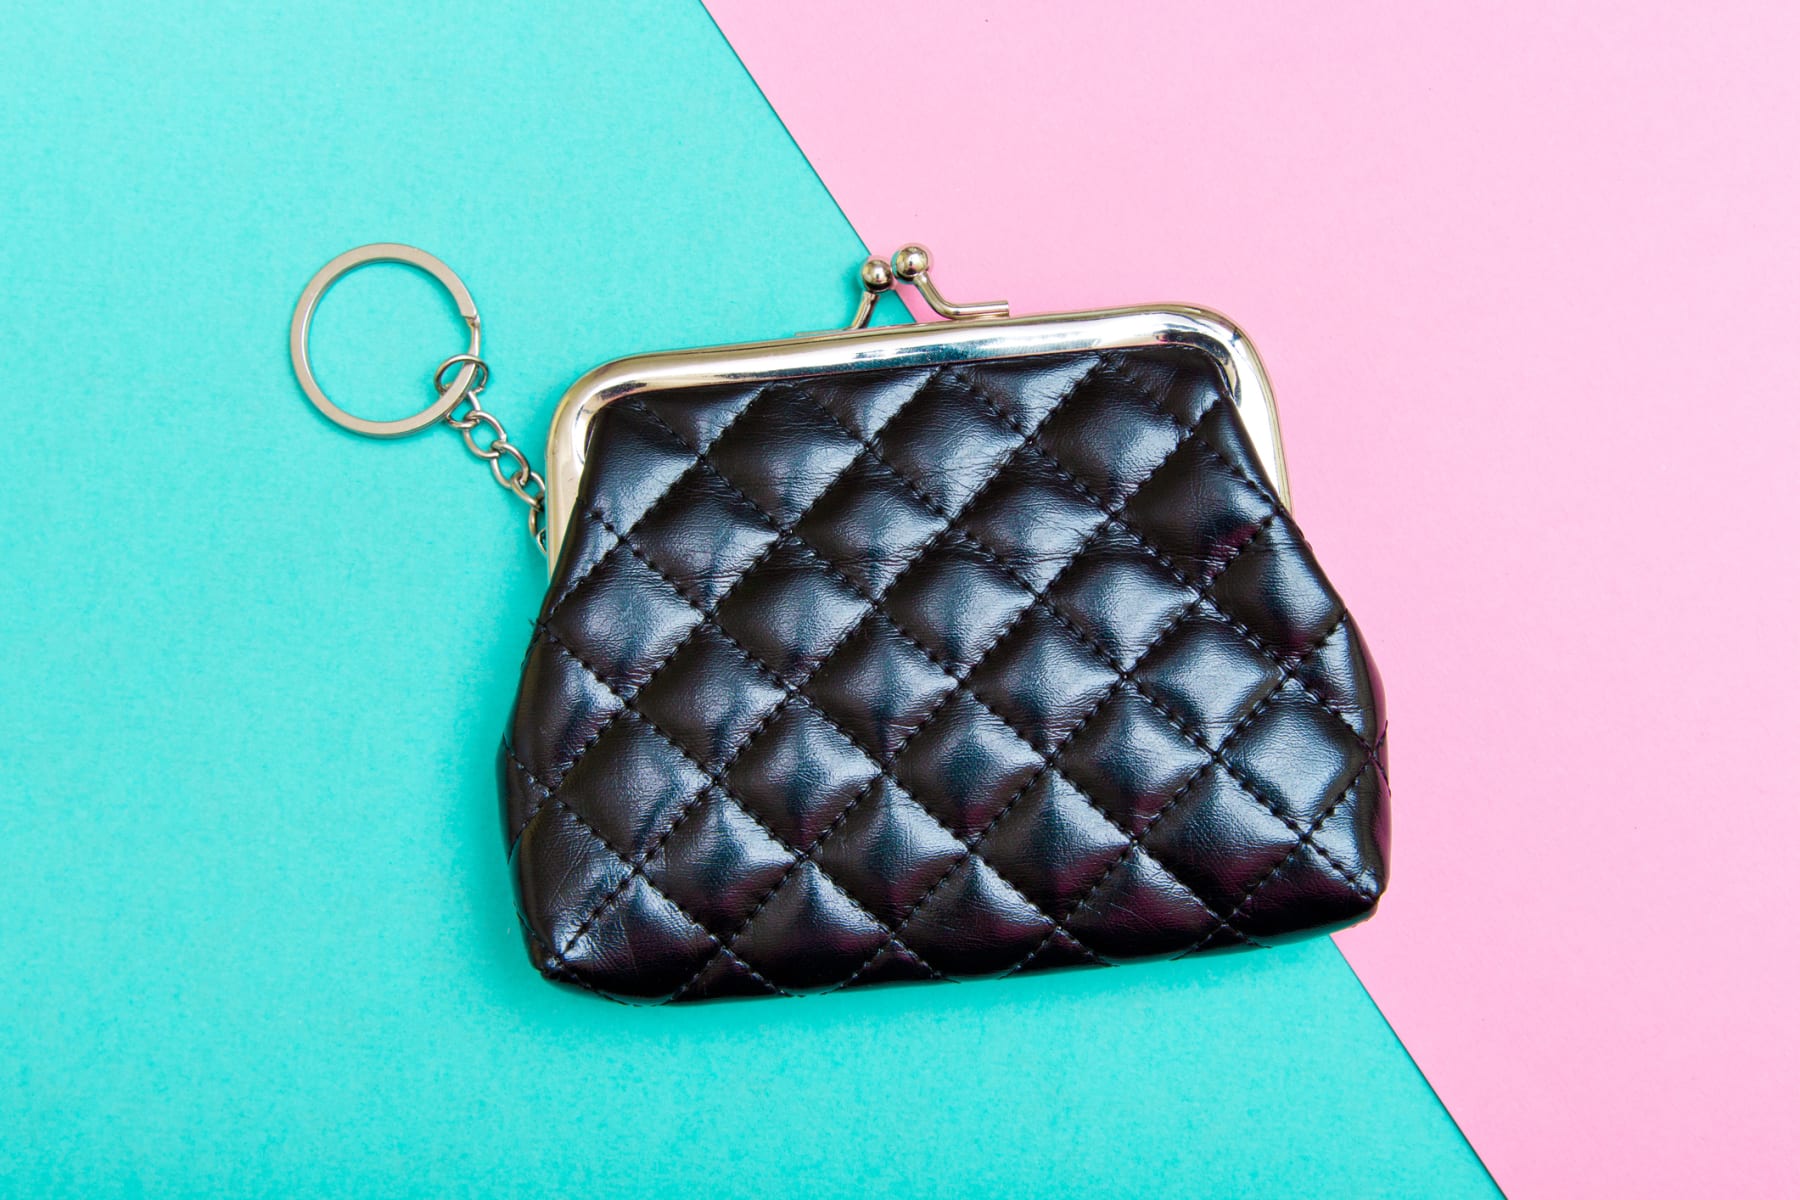 Black coin purse shown against a pink and turquoise background.